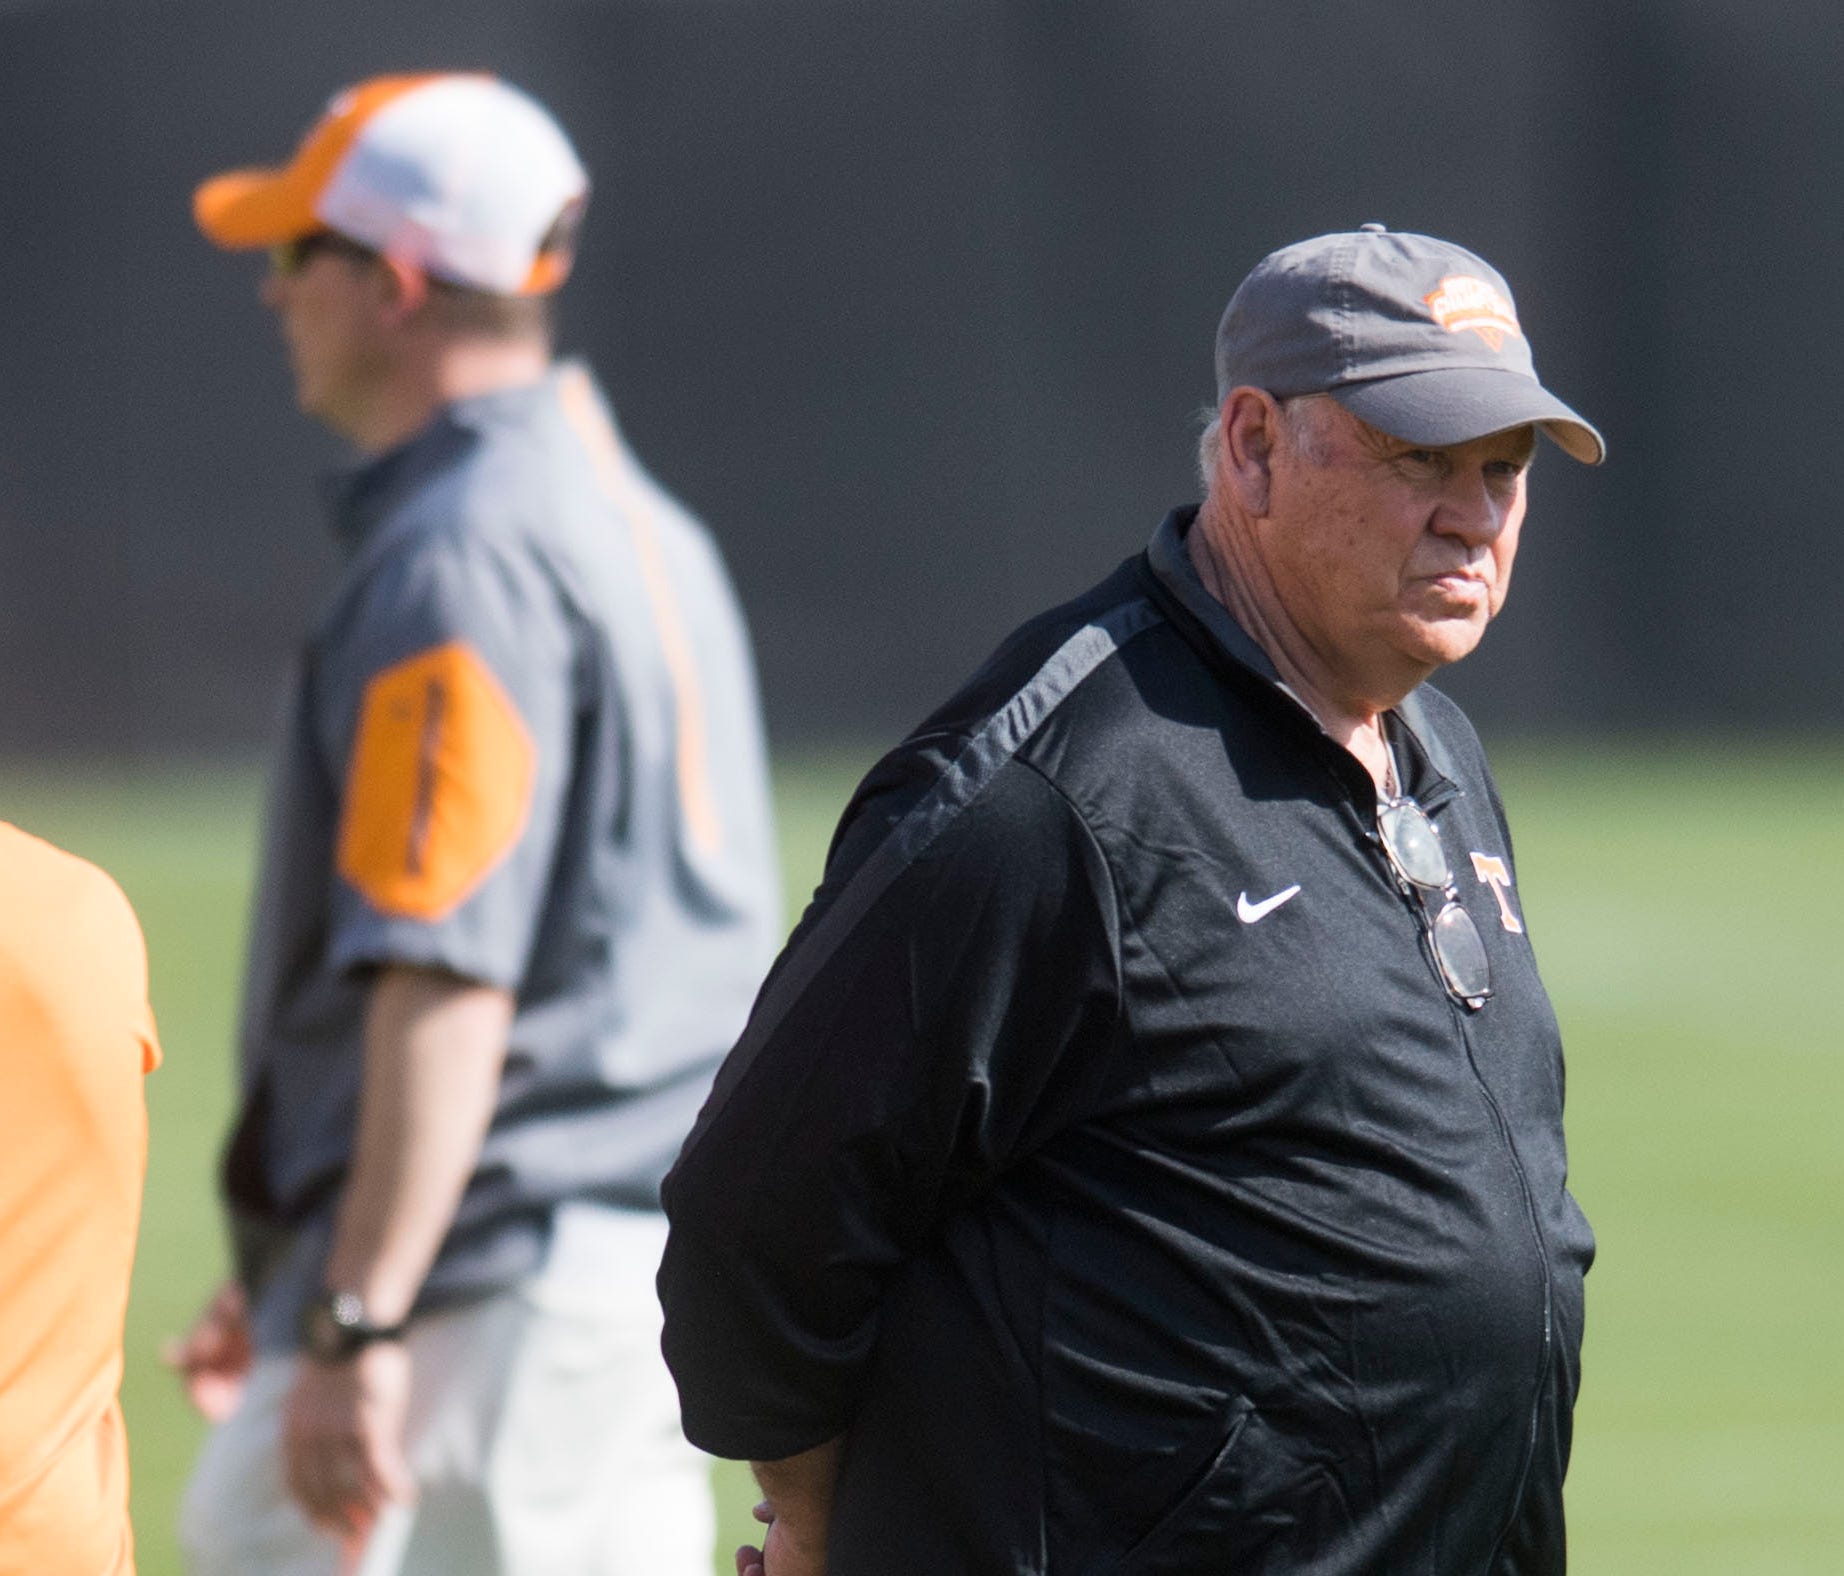 Tennessee athletic director Phillip Fulmer watches during a Vols football practice at University of Tennessee Tuesday, April 3, 2018.